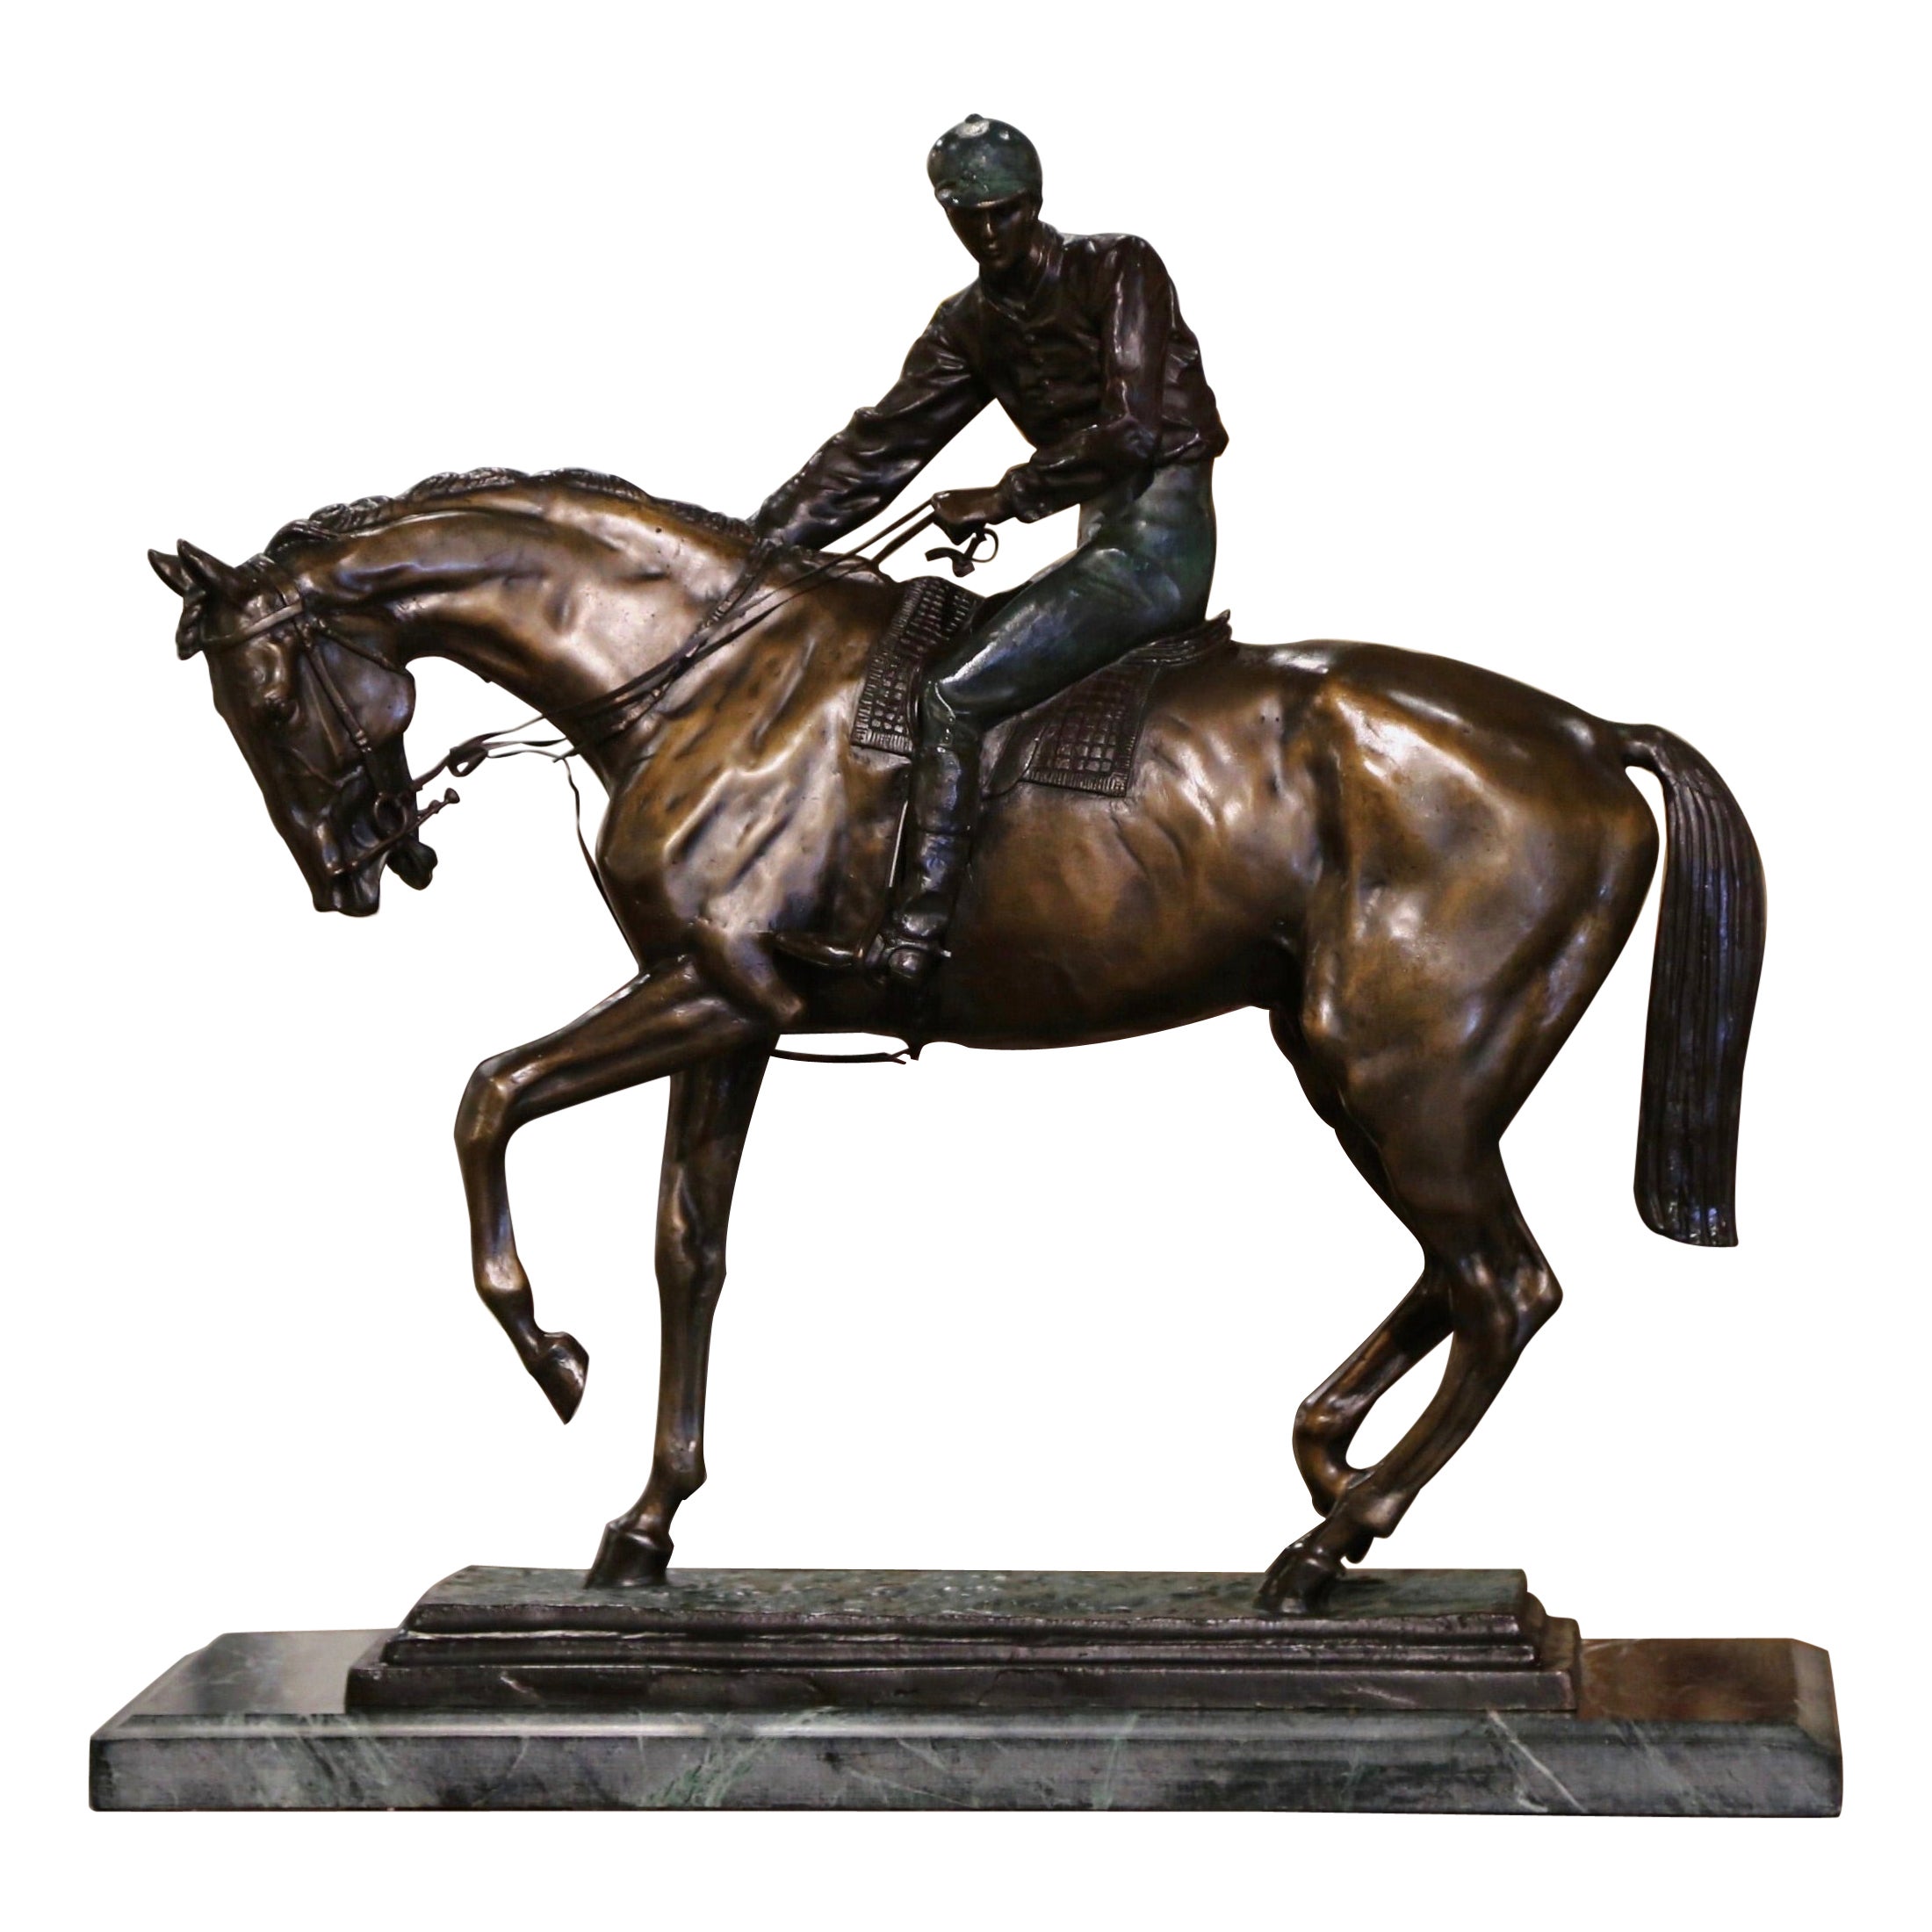 Late 19th Century French Bronze Sculpture "Le Grand Jockey" Signed I. Bonheur